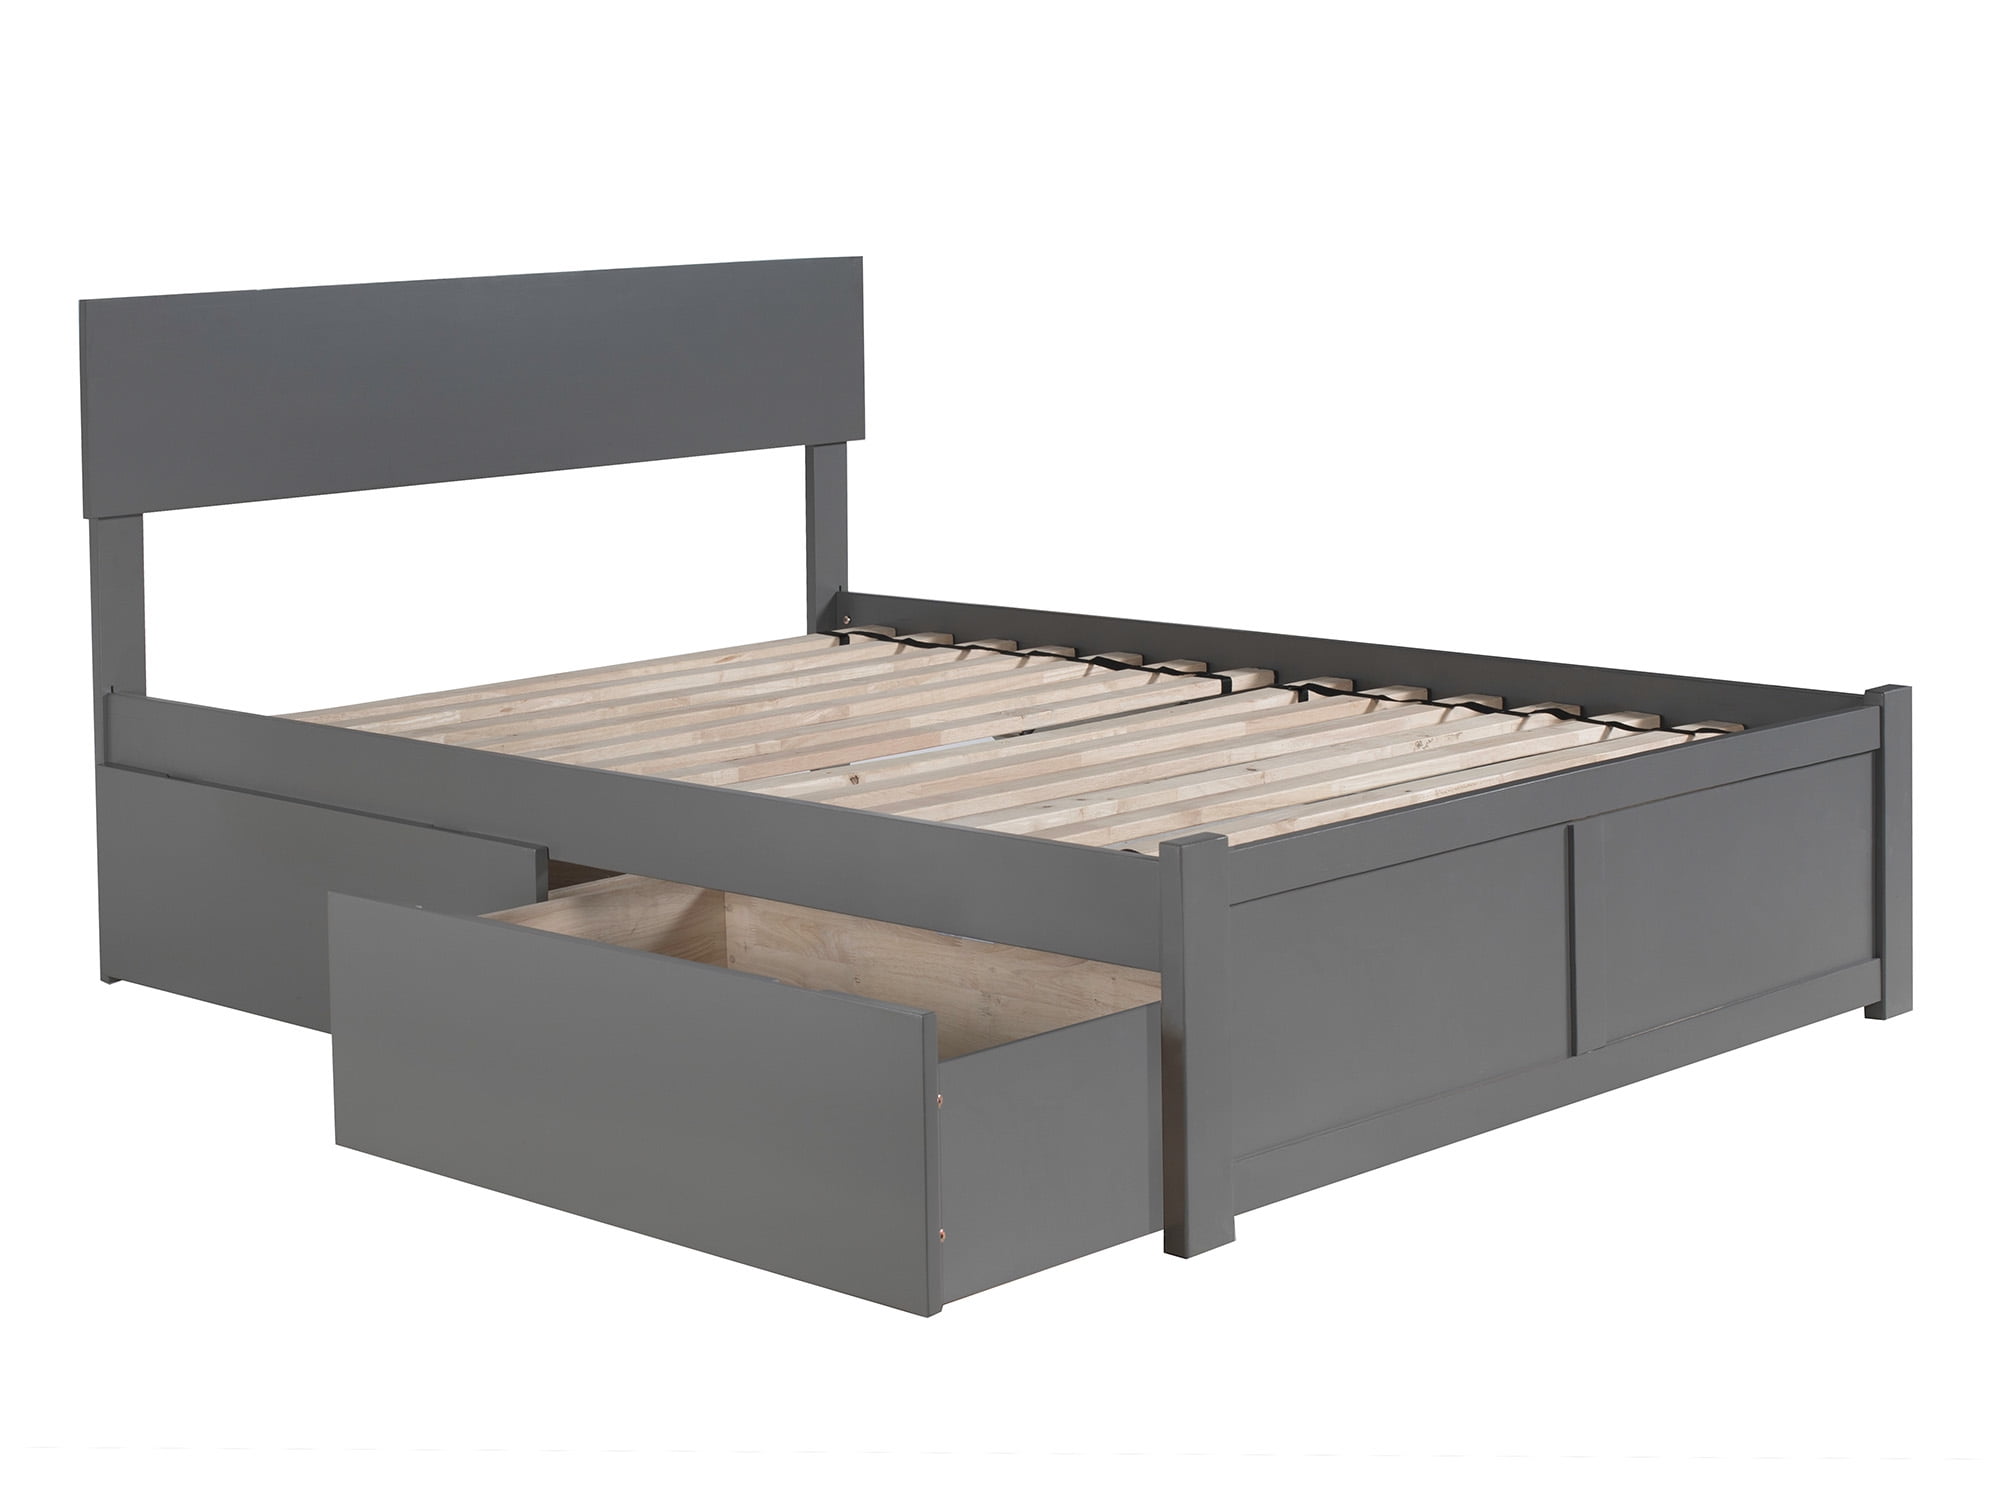 Picture of Atlantic Furniture AR8142119 Orlando Queen Platform Bed with Flat Panel Foot Board & 2 Urban Bed Drawers - Grey